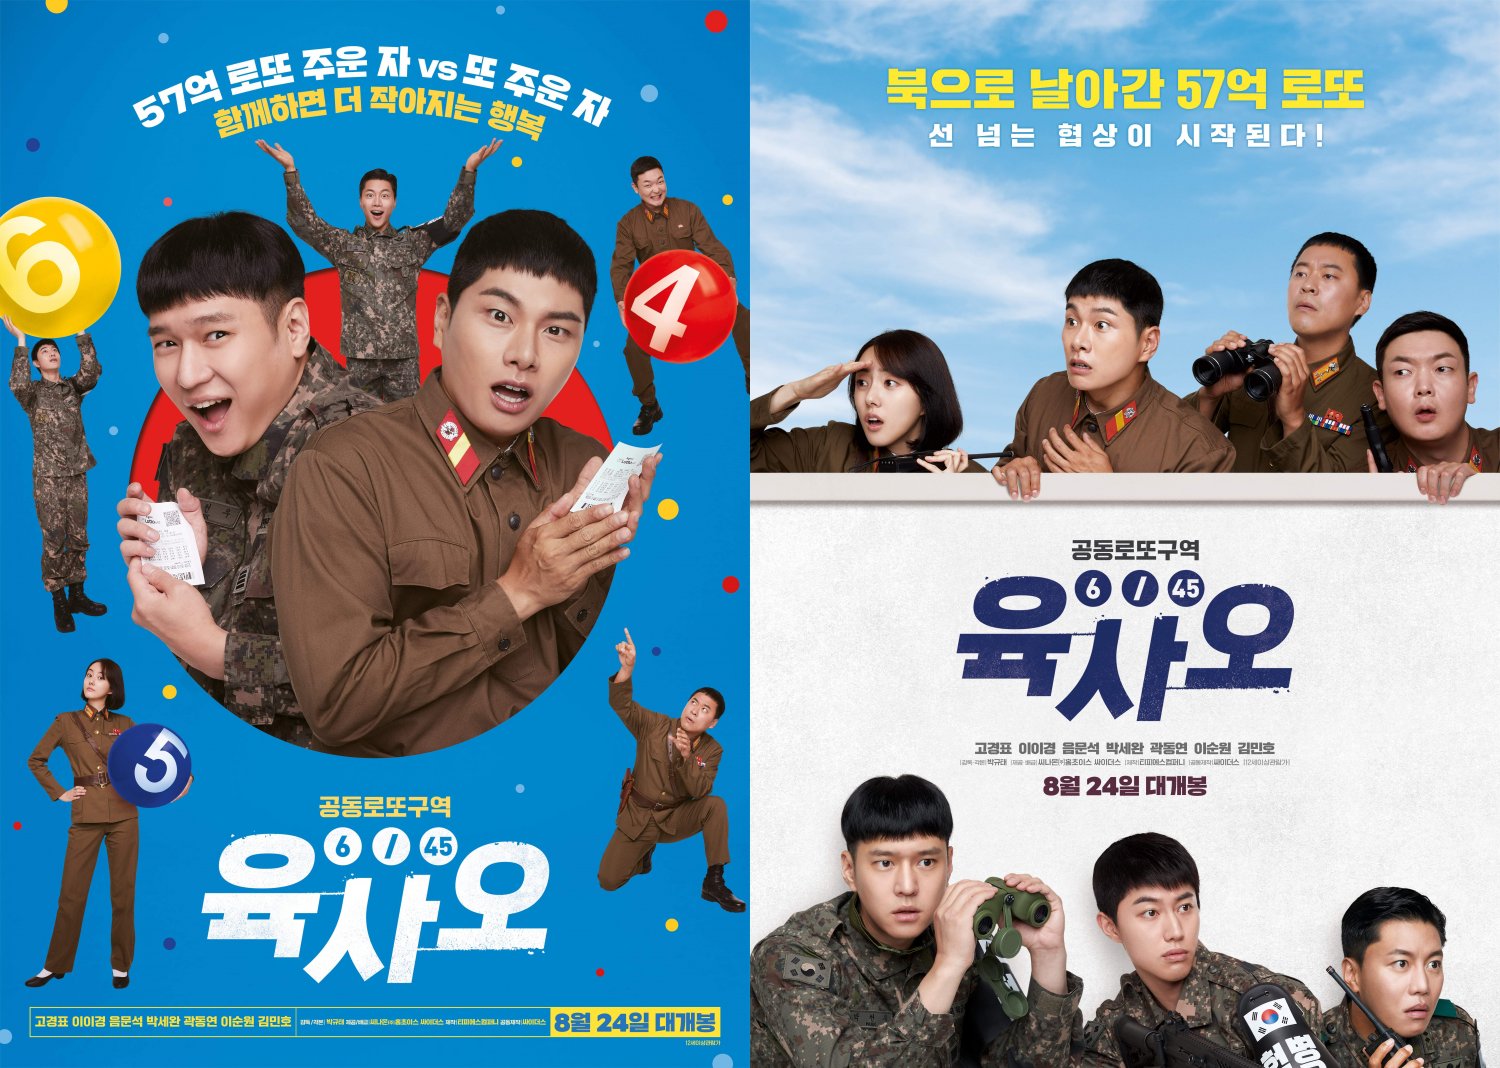 [Photos + Video] New Posters and Trailer Added for the Korean